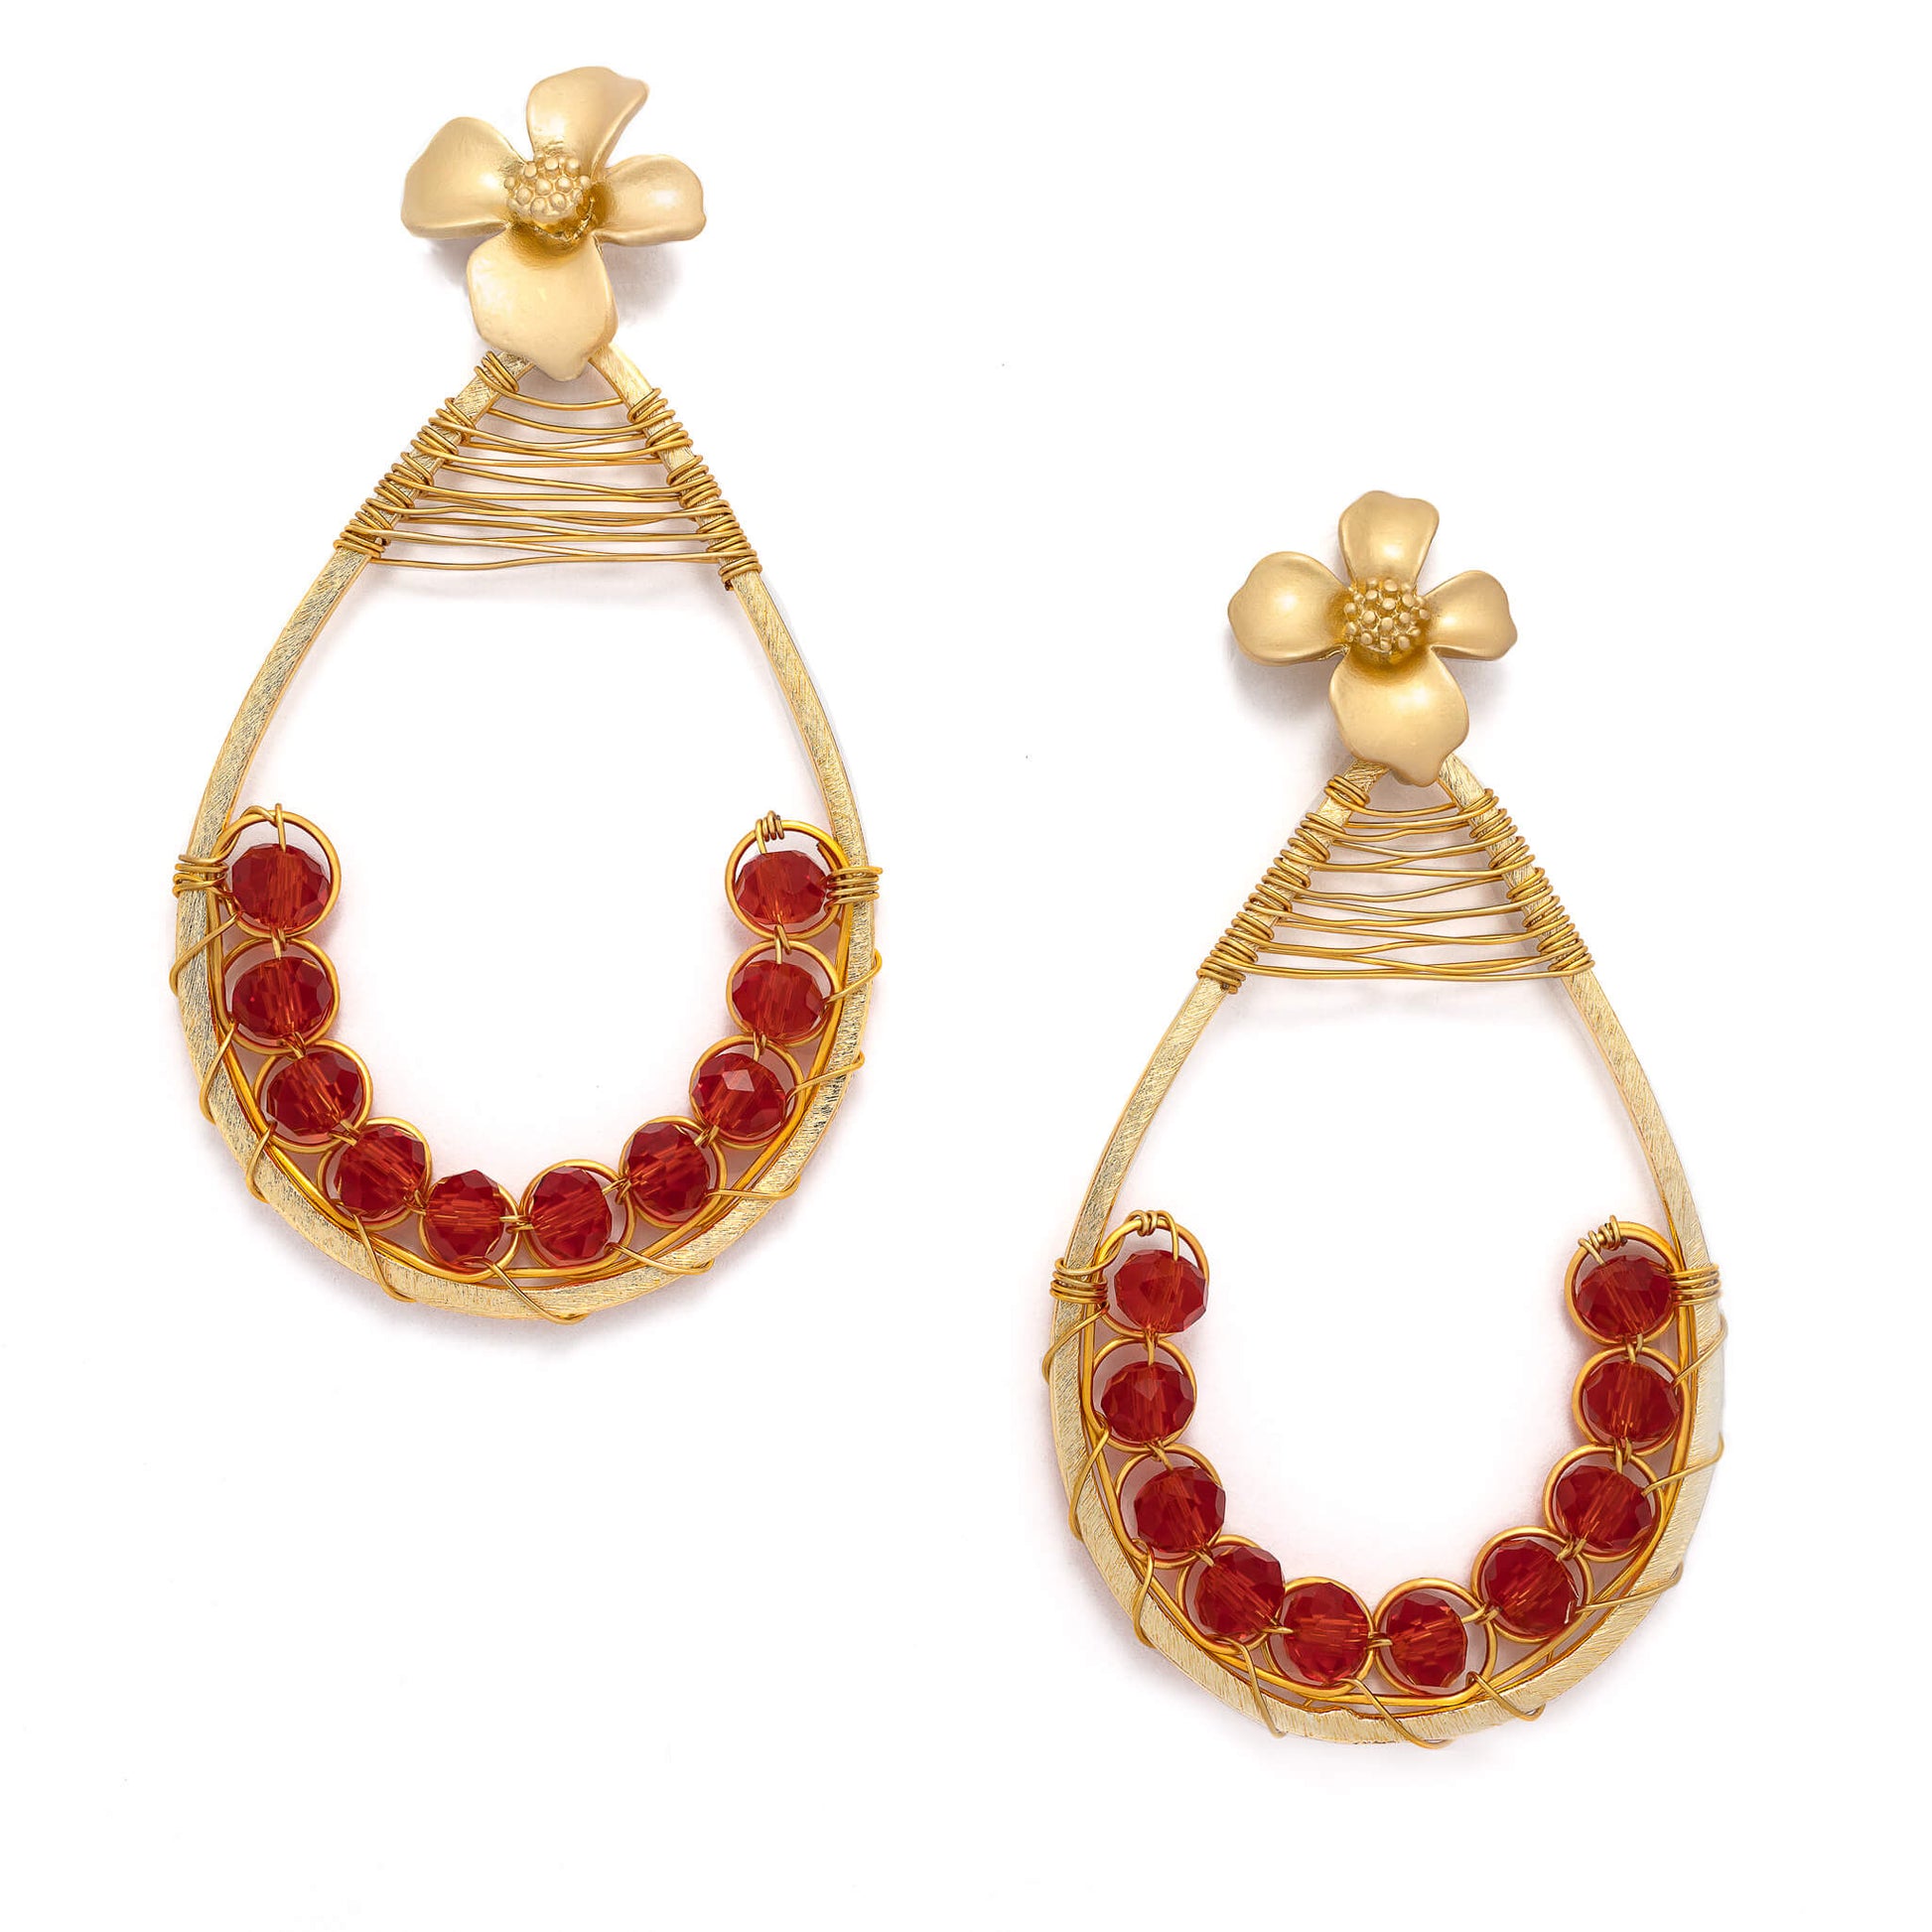 Emma teardrop Earrings are 3 inches long. Gold and Red earrings Handmade with faceted Beads Crystals, gold-plated wire, and a metal frame. Beaded earrings for women